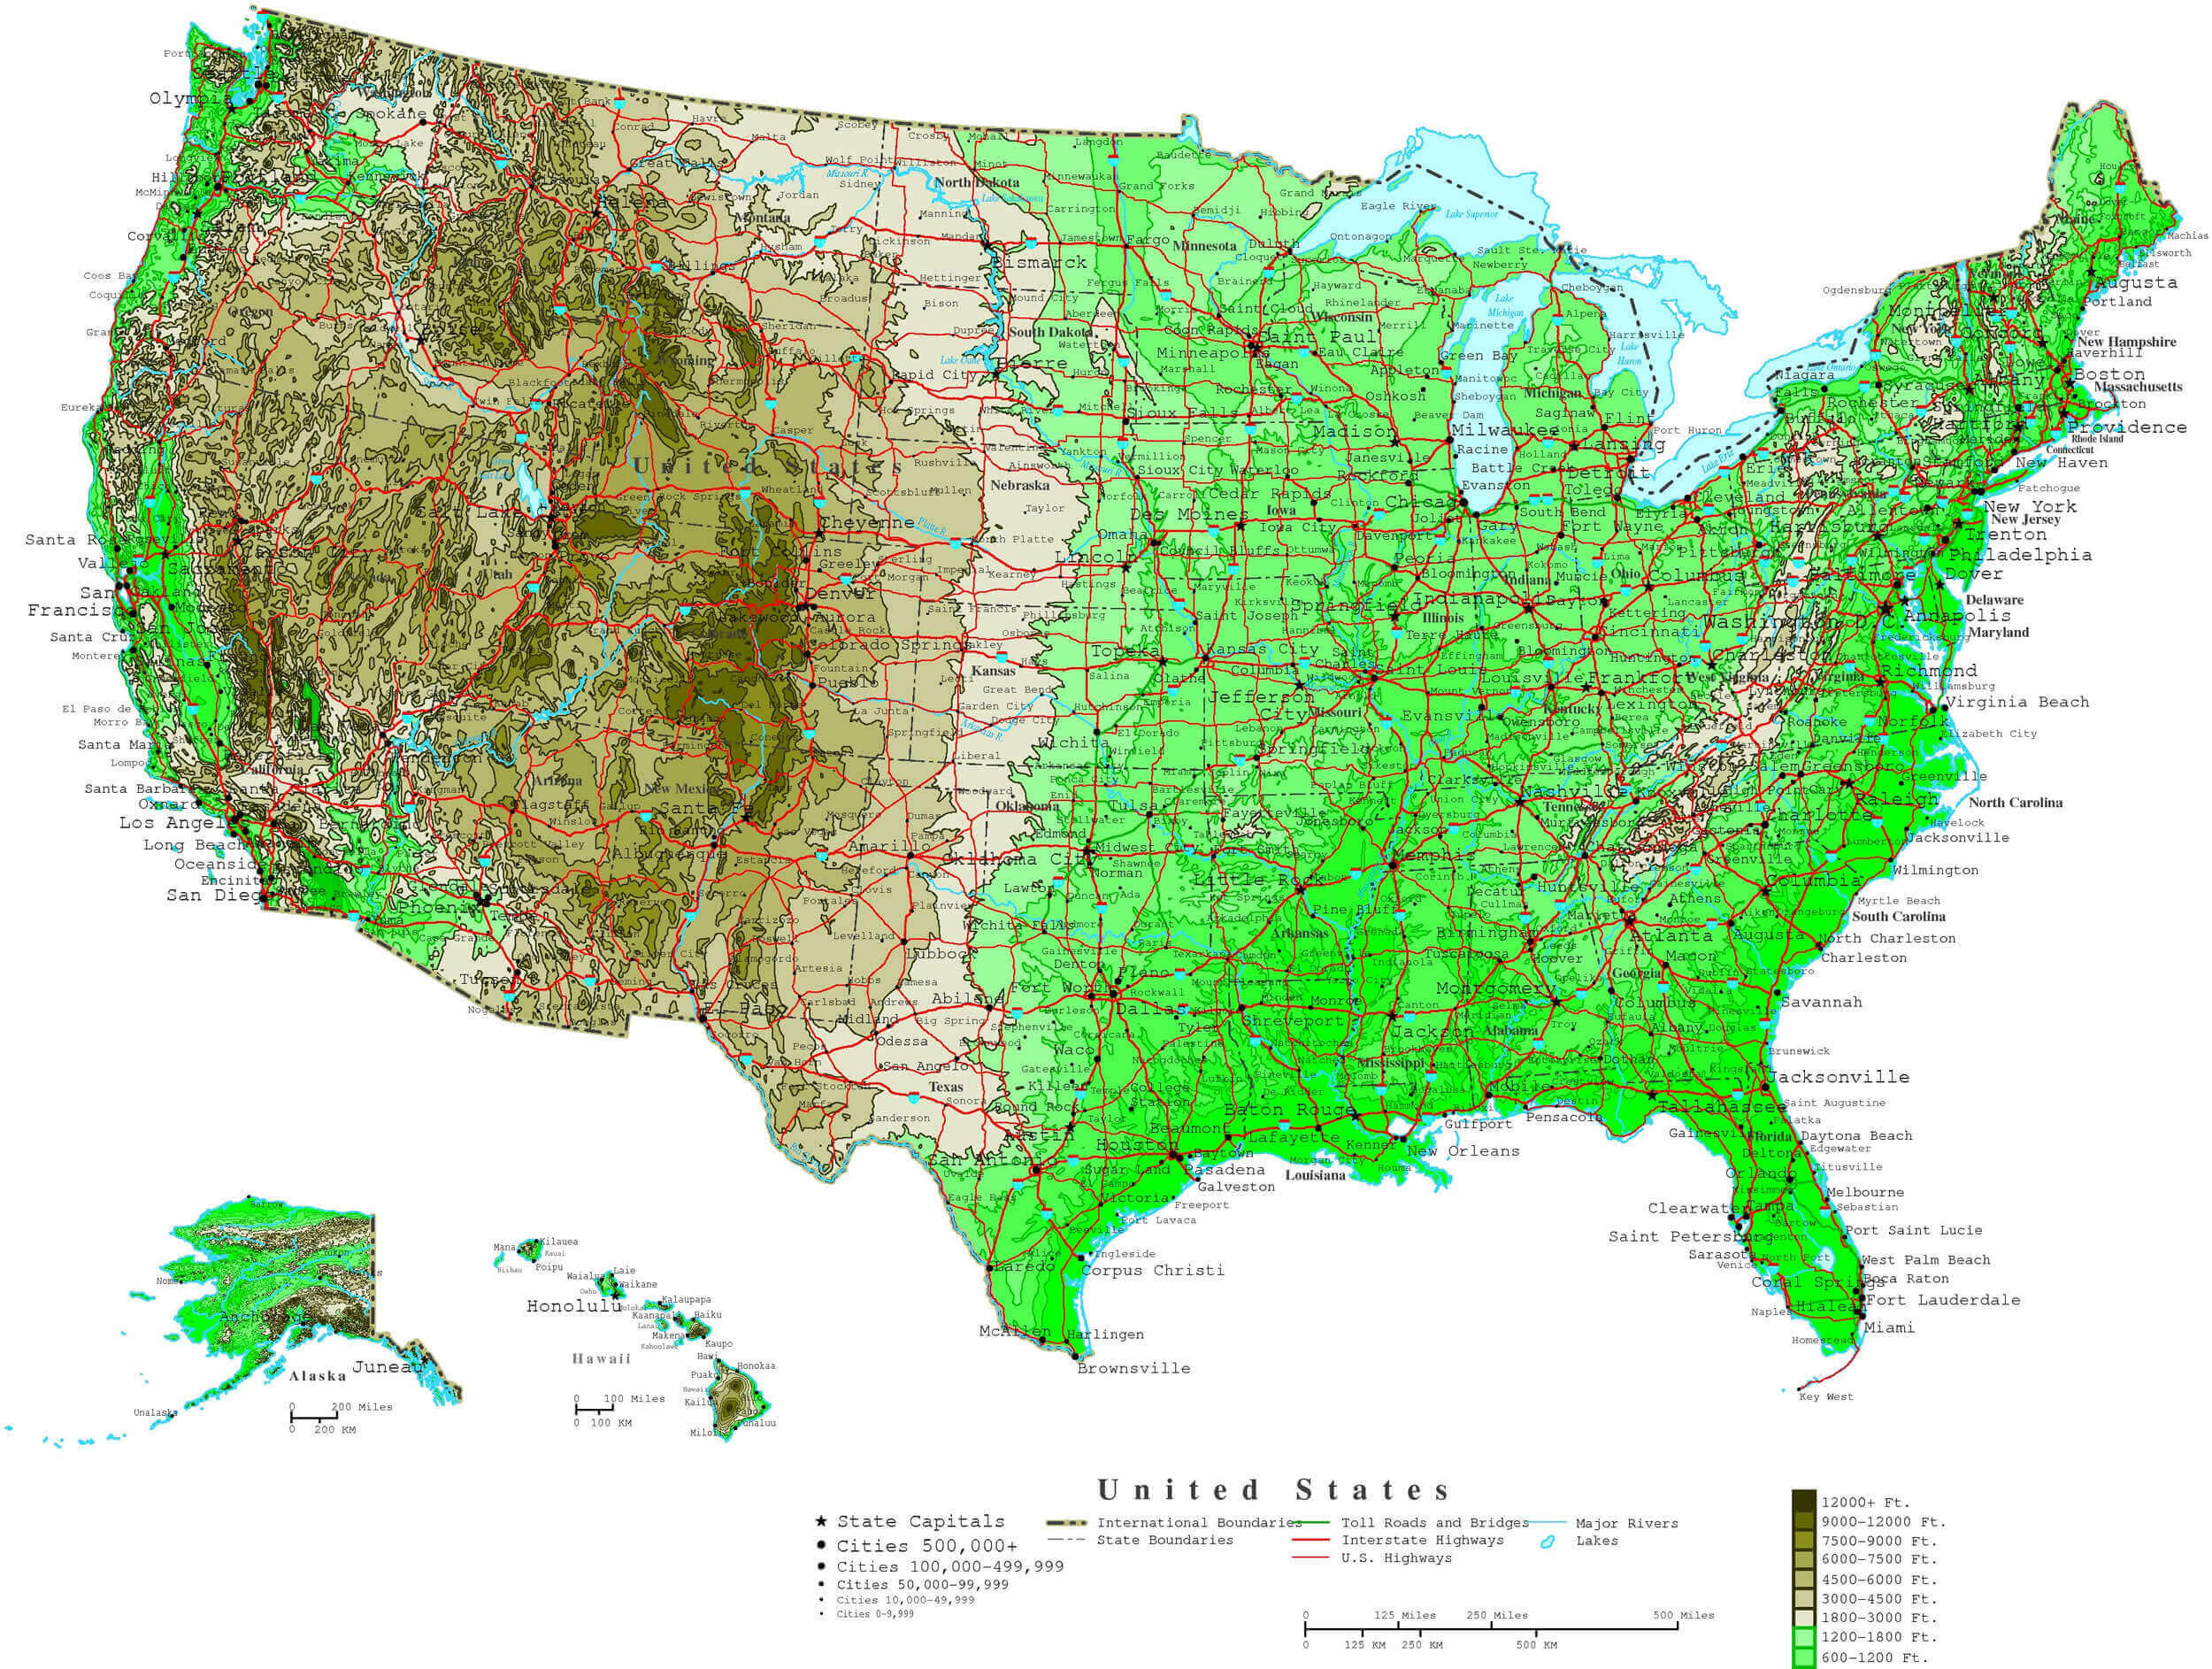 United States Population Density Cities Map